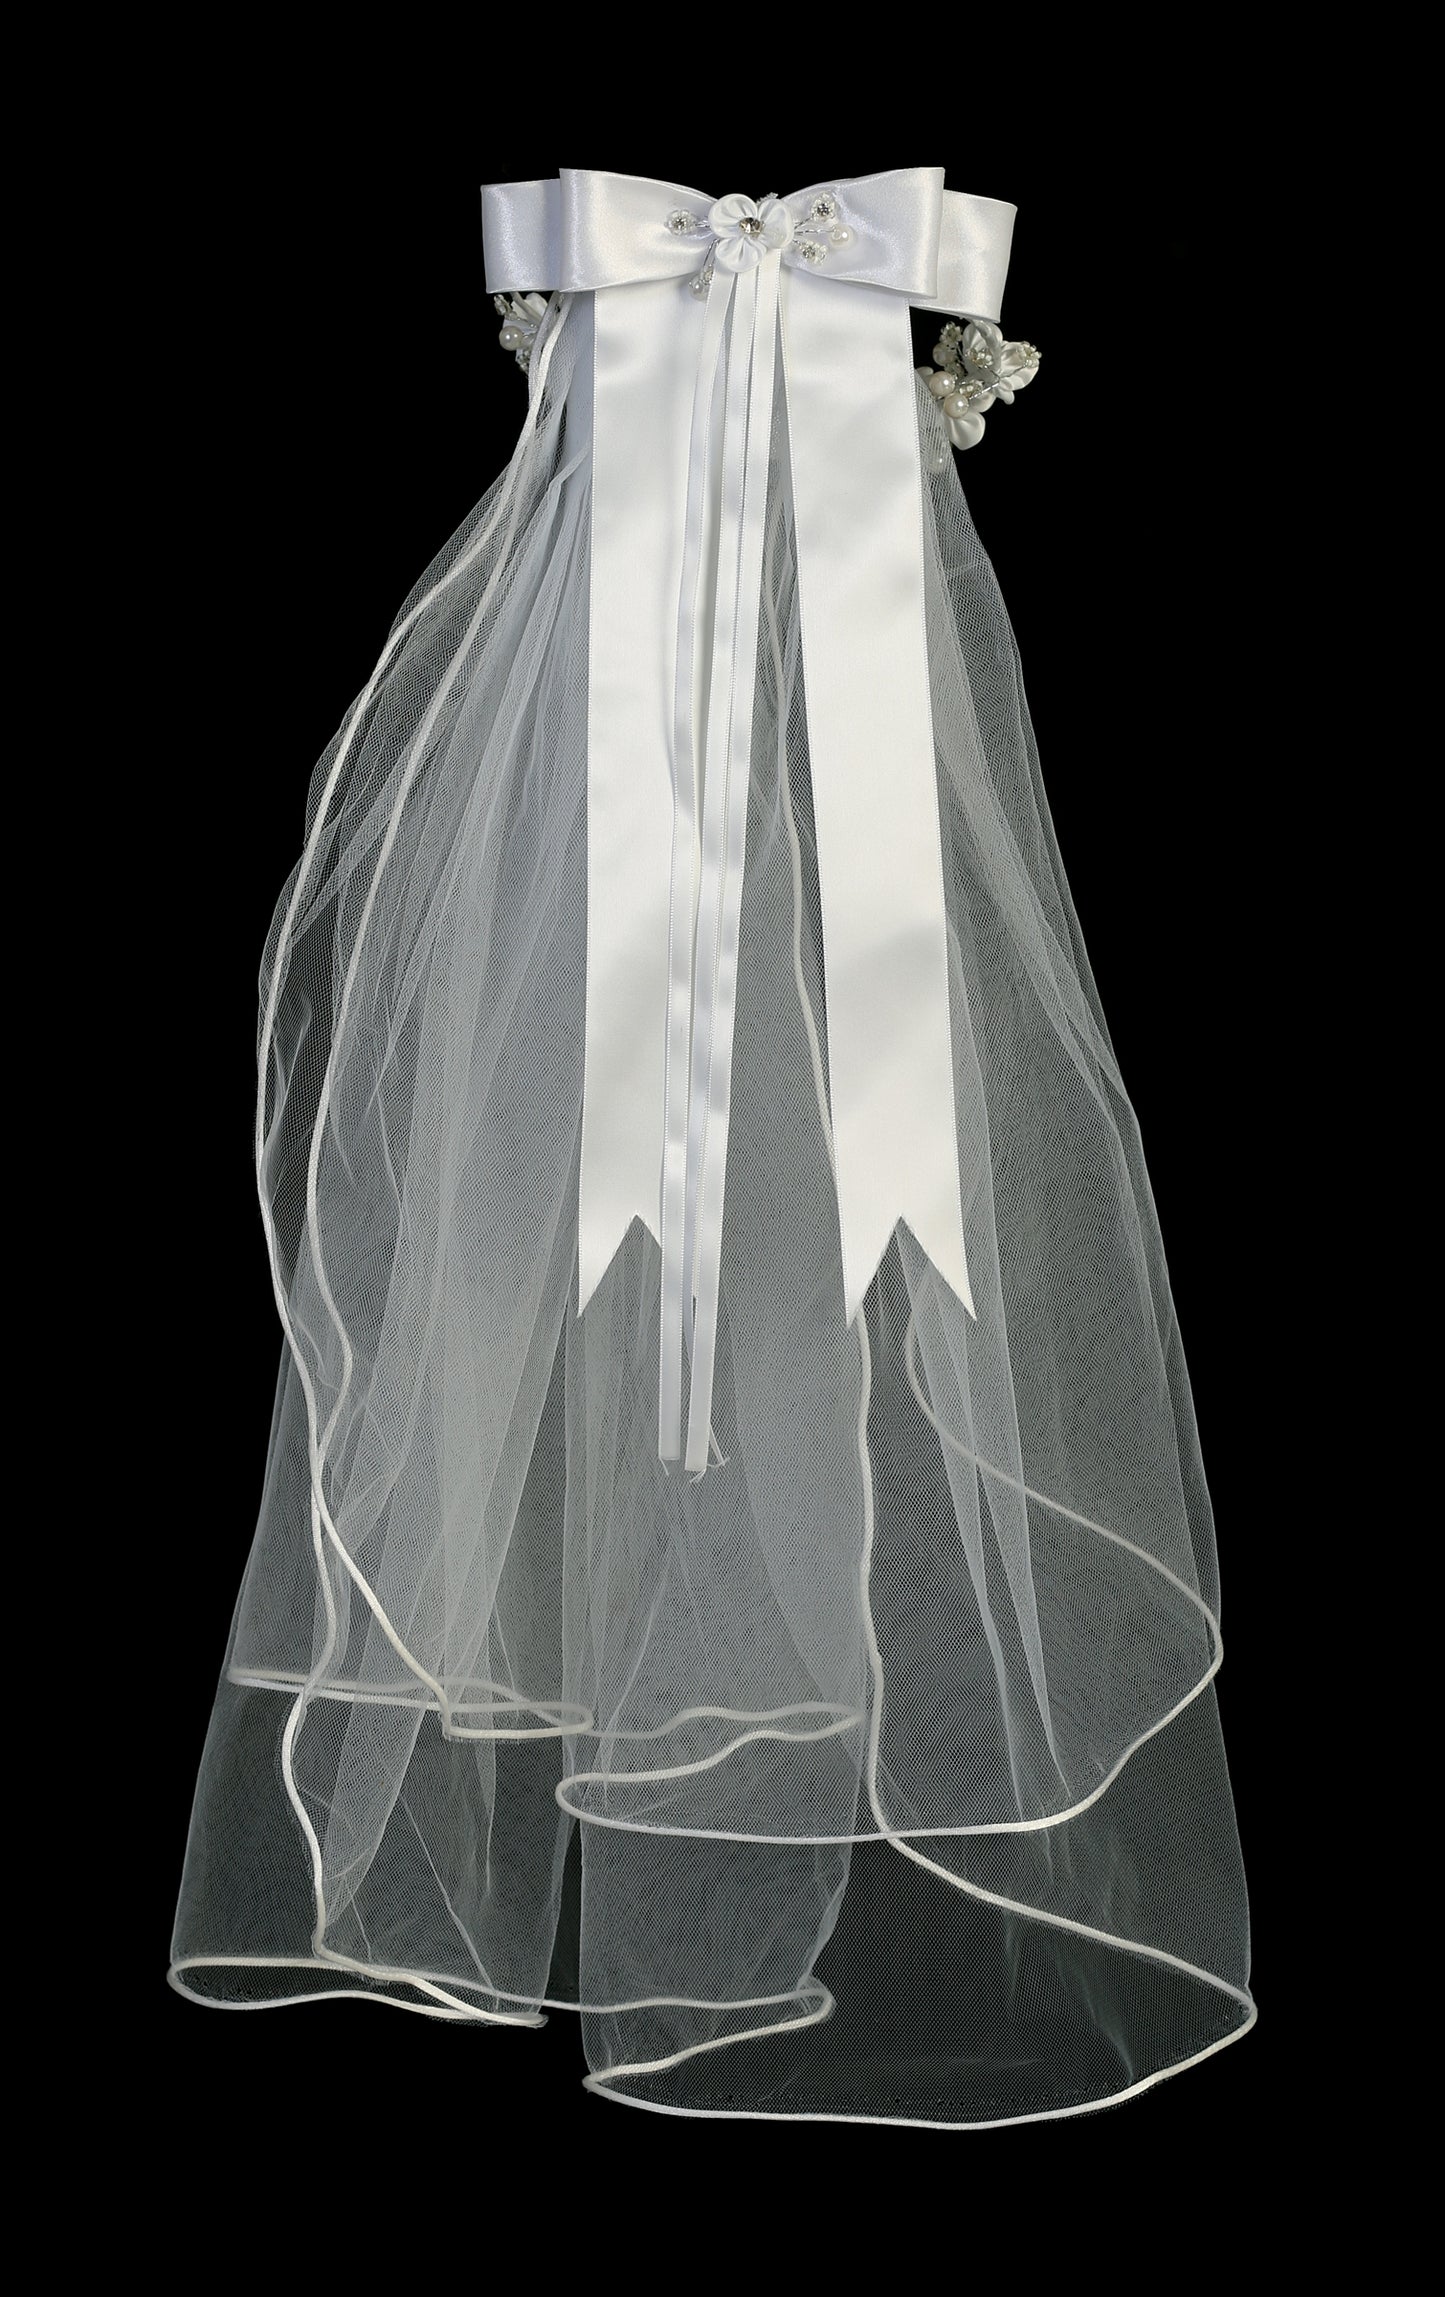 First Communion Veil with Satin Flowers, Rhinestones and Pearls - T-451